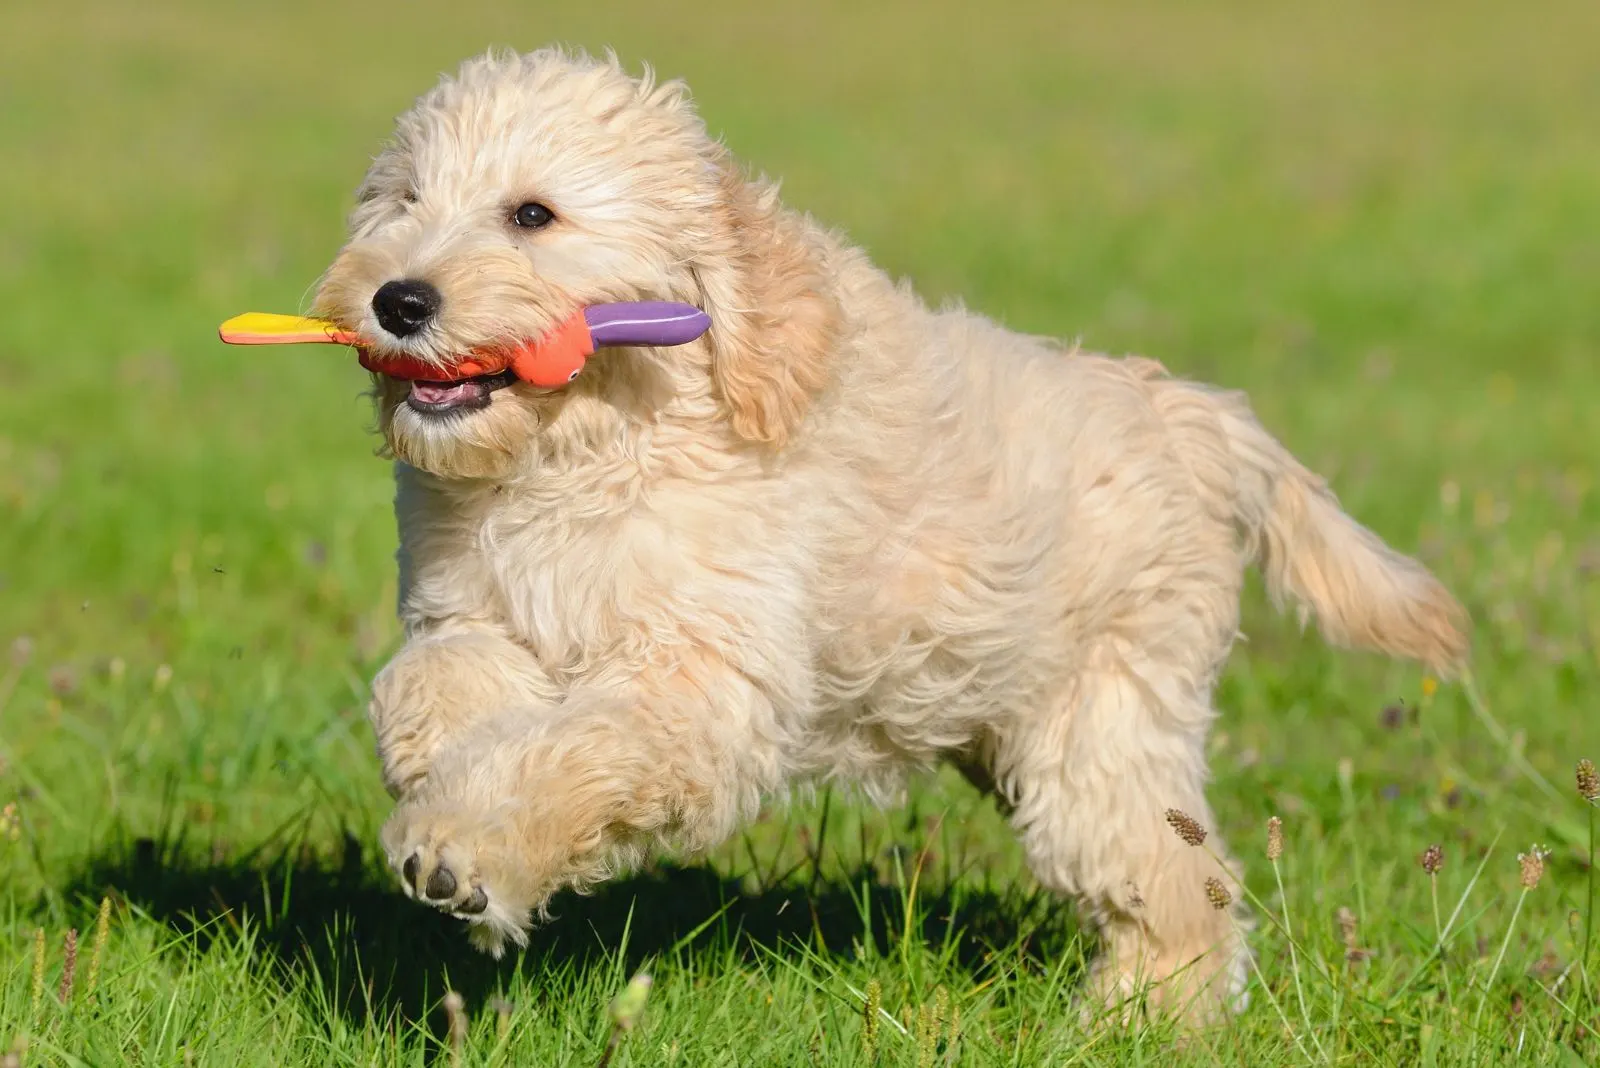 A goldendoodle runs across the field with a toy in its mouth